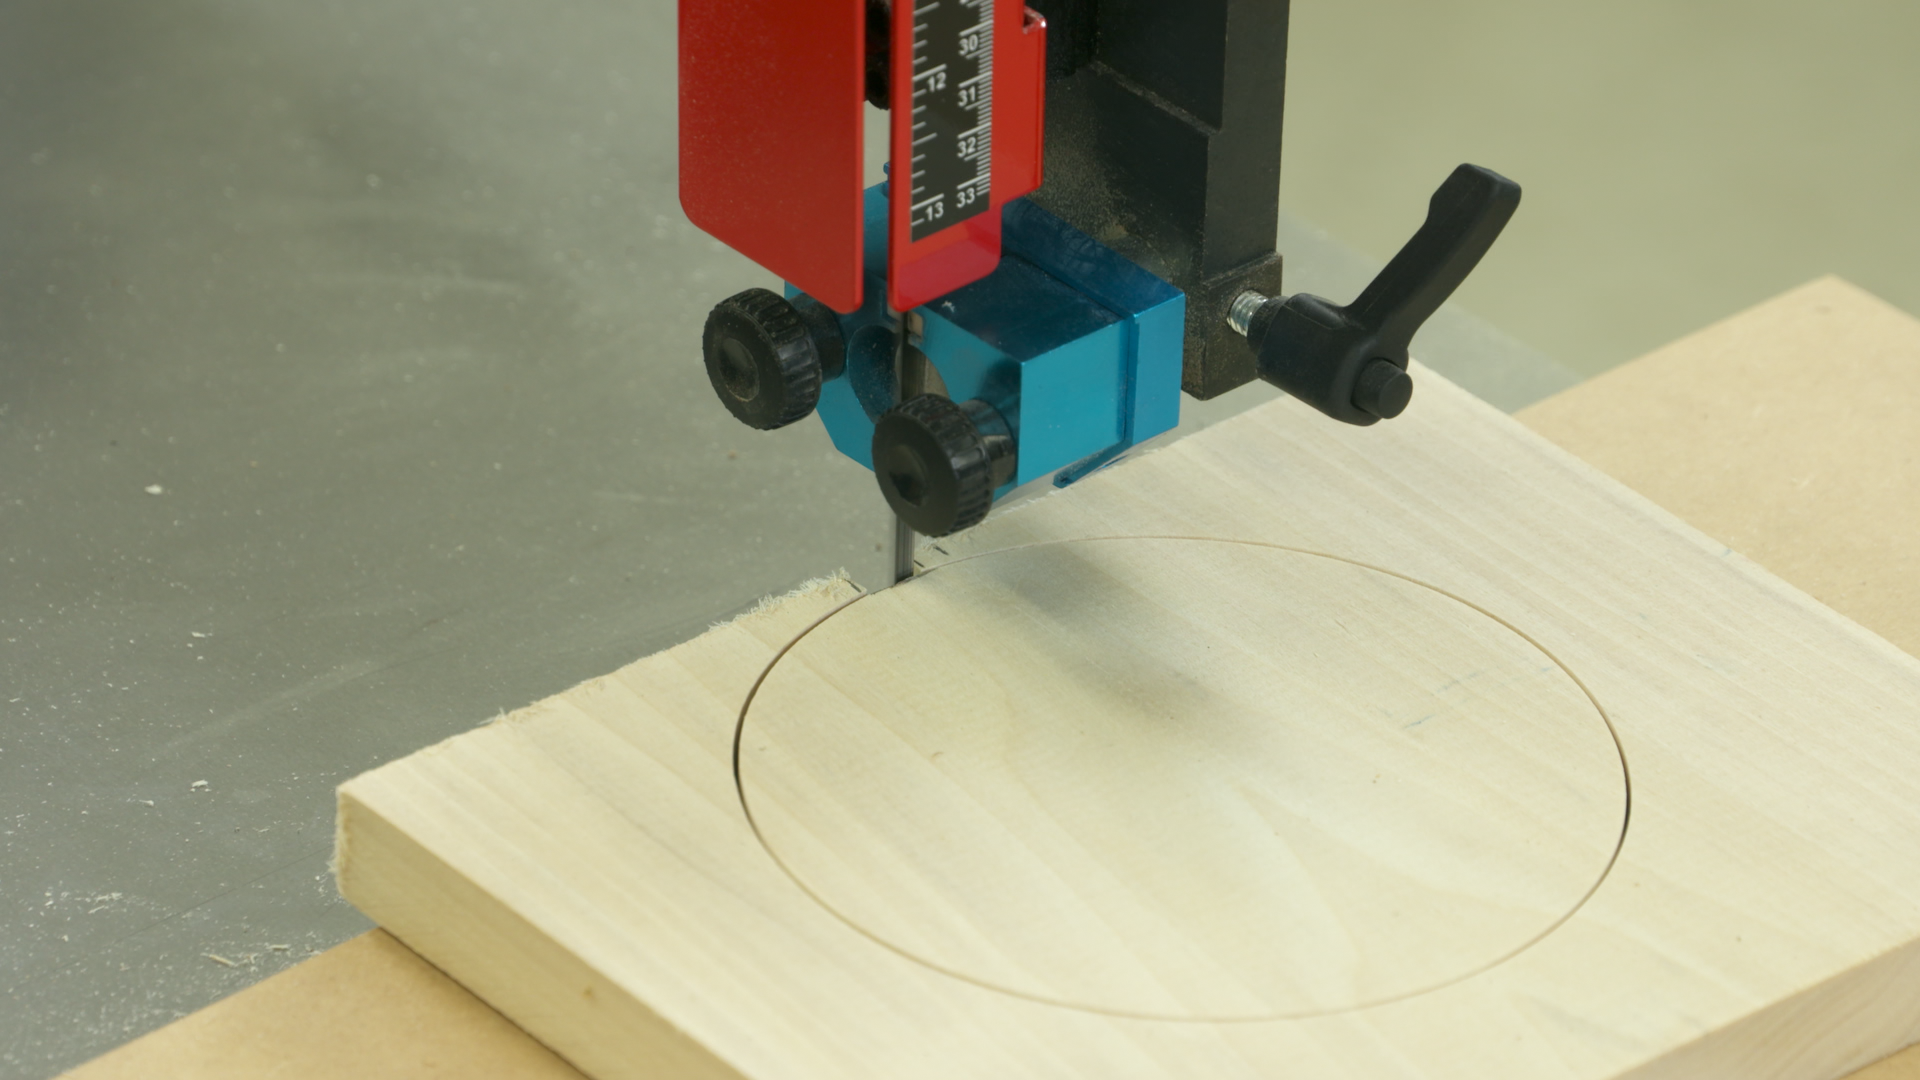 Session 5: Bandsaw Circle Cutter